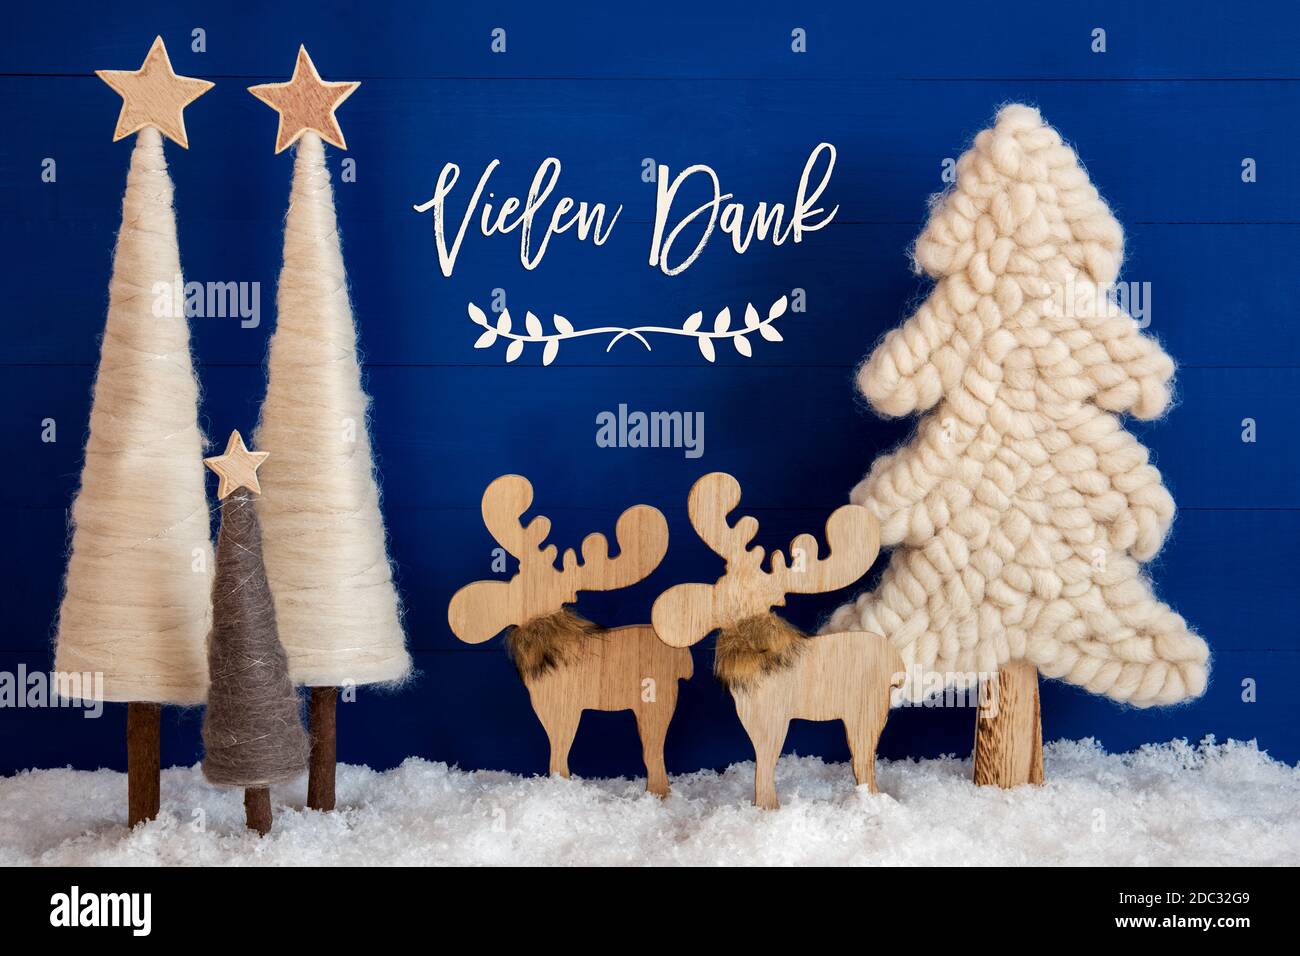 German Calligraphy Vielen Dank Means Thank You On Blue Background With Snow. Decoration And Ornament Like Christmas Trees And A Moose Couple. Stock Photo